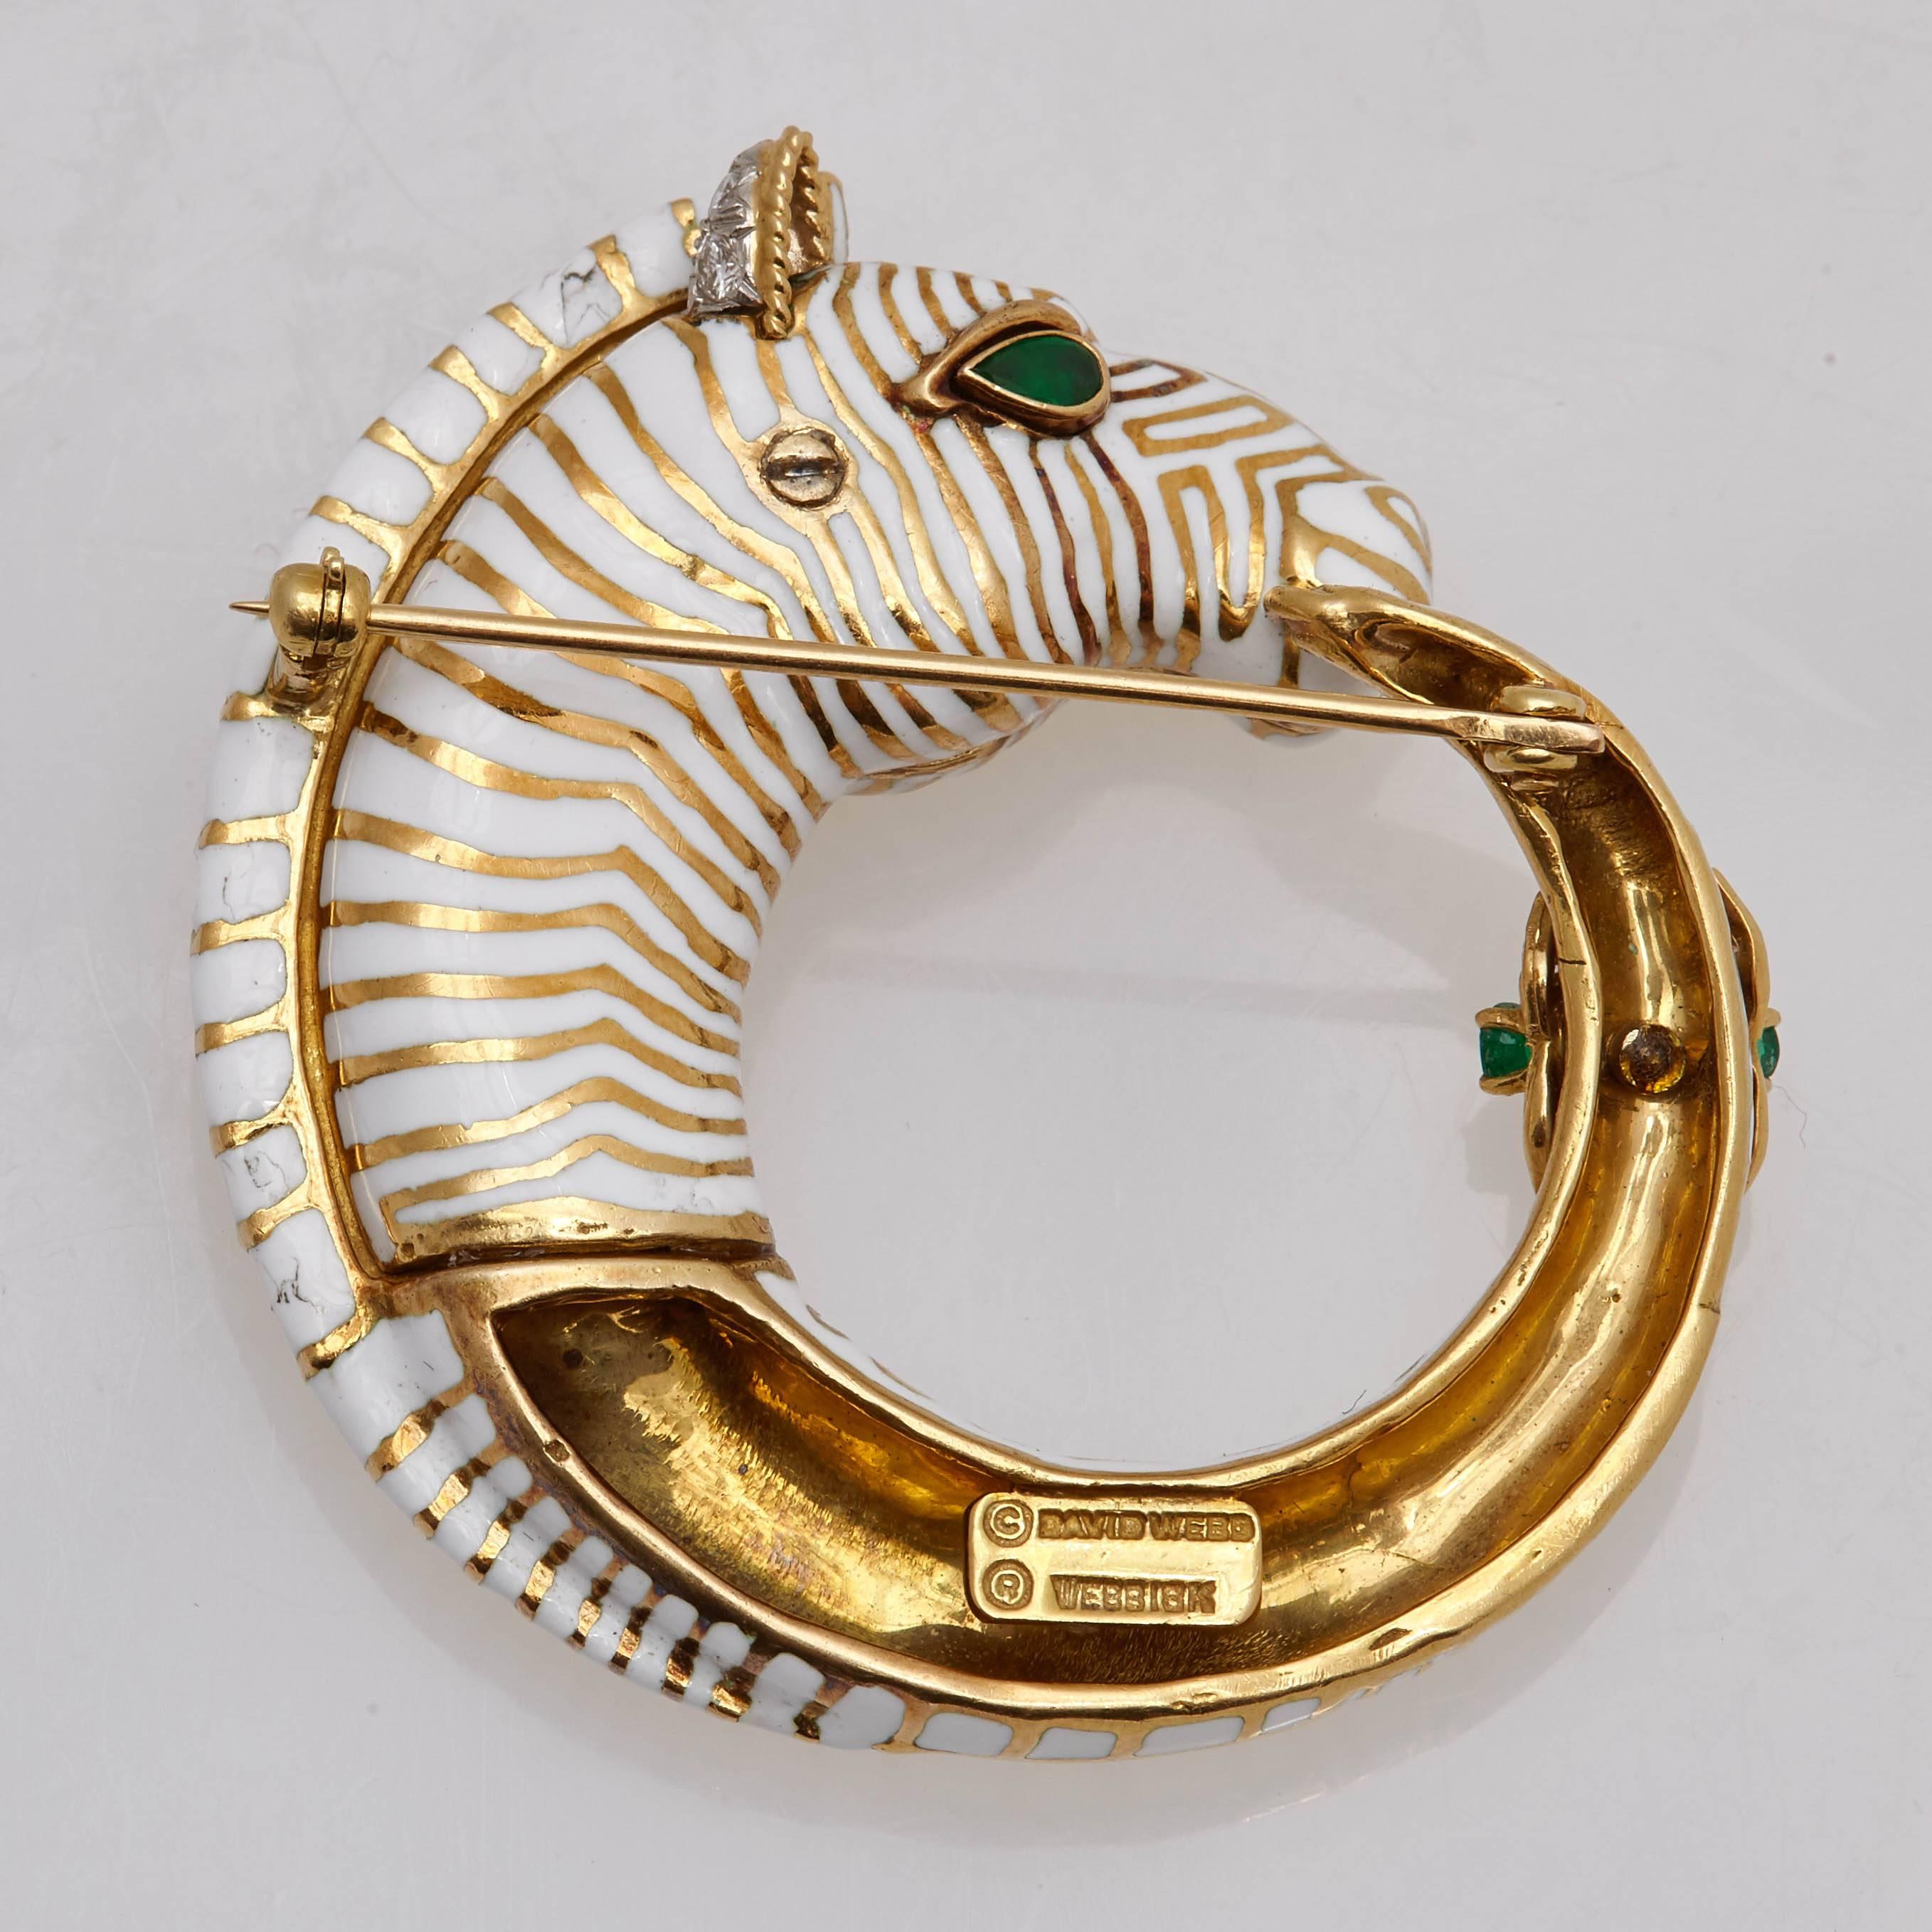 An 18K Gold, White & Black Enamel Zebra brooch with Emeralds, by David Webb. Made in the United States, circa 1970s. 